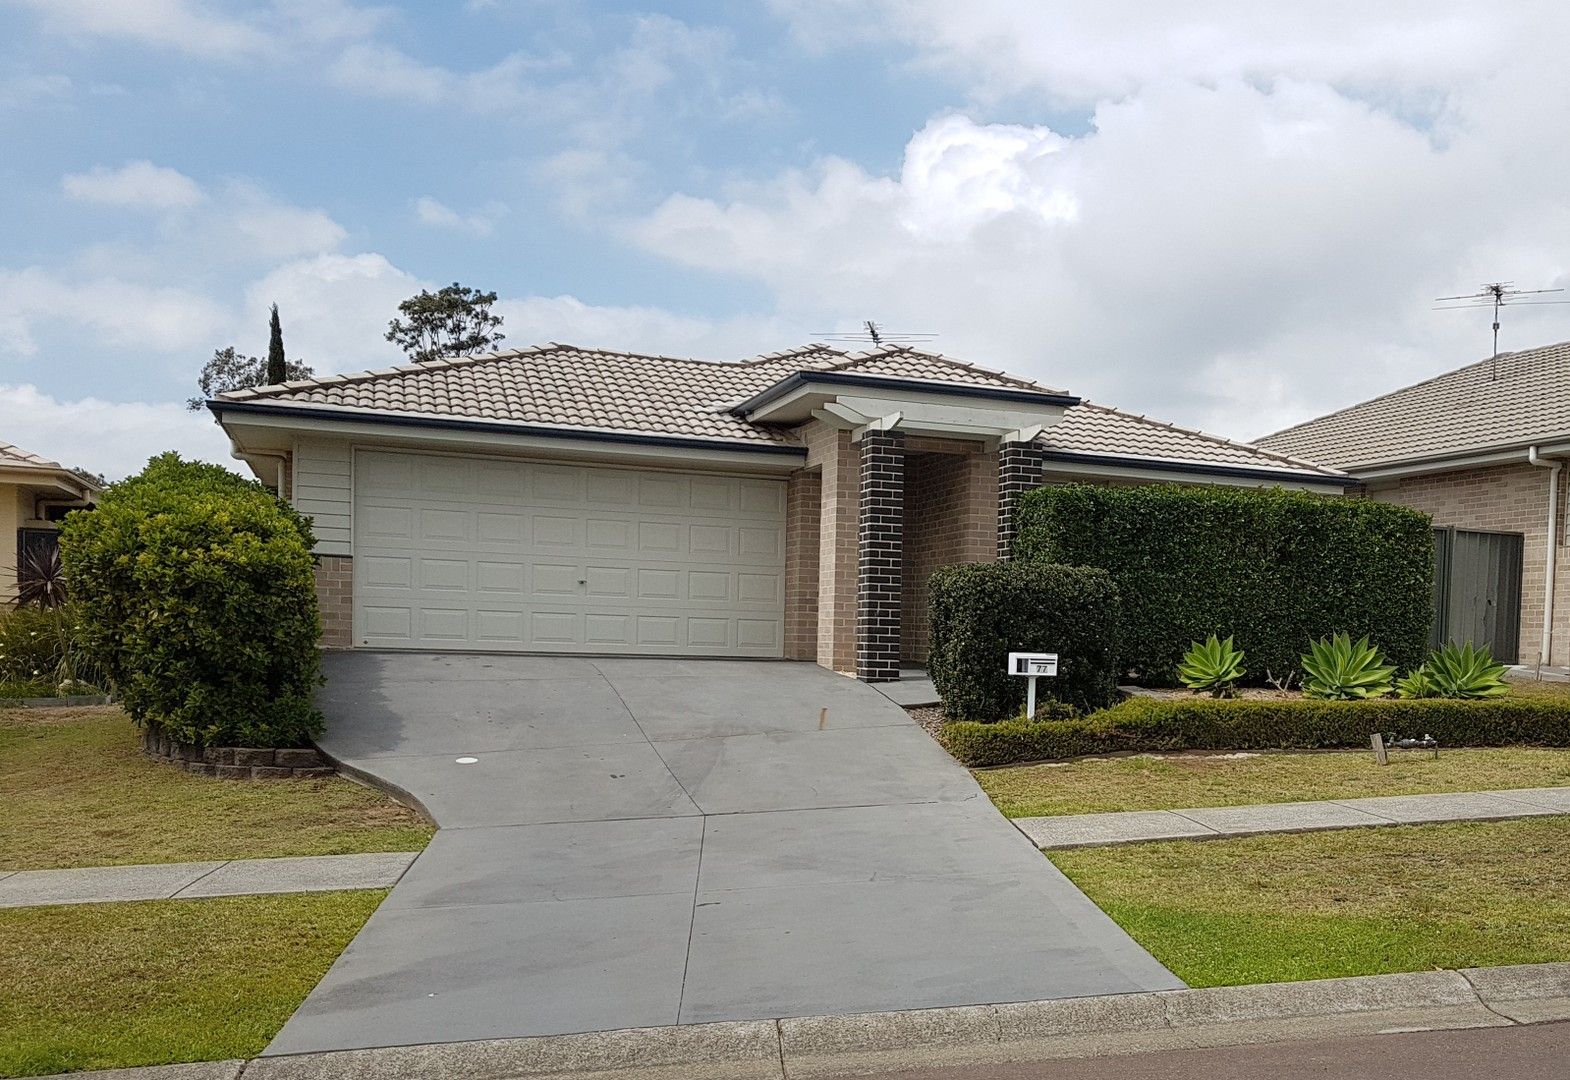 77 Clydesdale Street, Wadalba NSW 2259, Image 0